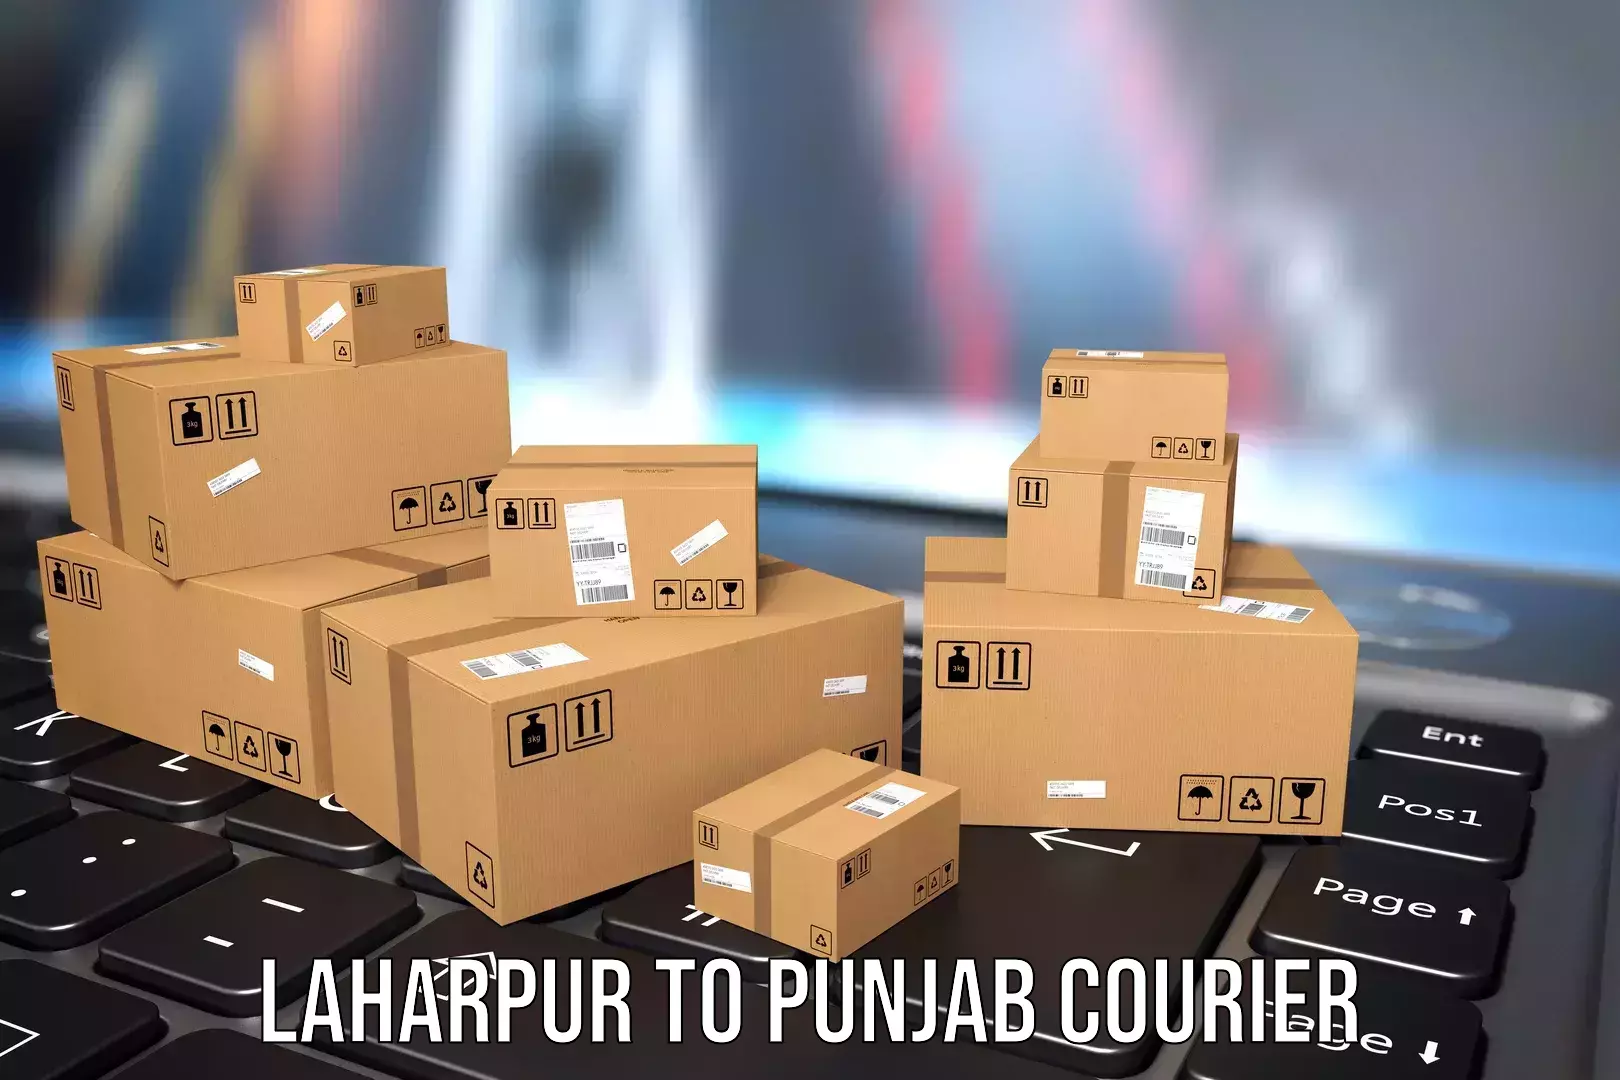 Luggage shipment processing Laharpur to Thapar Institute of Engineering and Technology Patiala